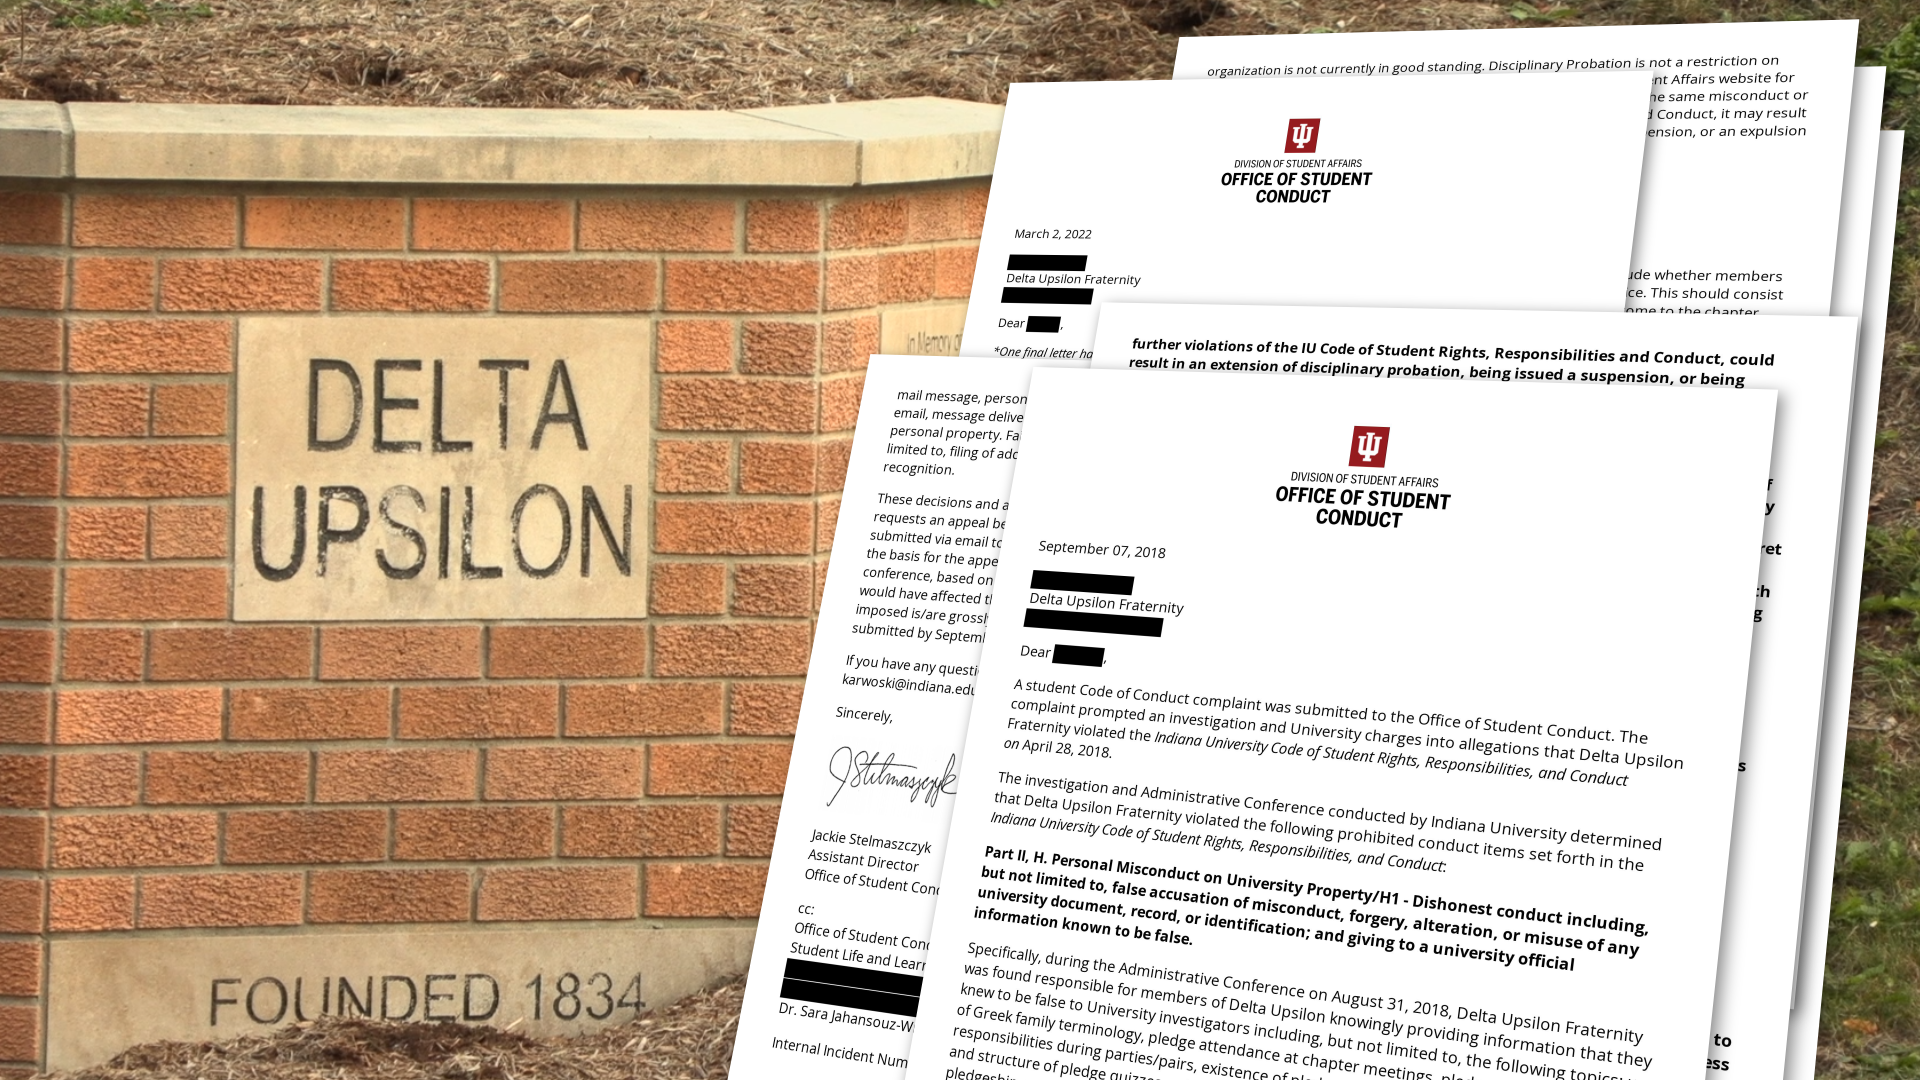 Documents detail conduct that led to suspension of IU frat